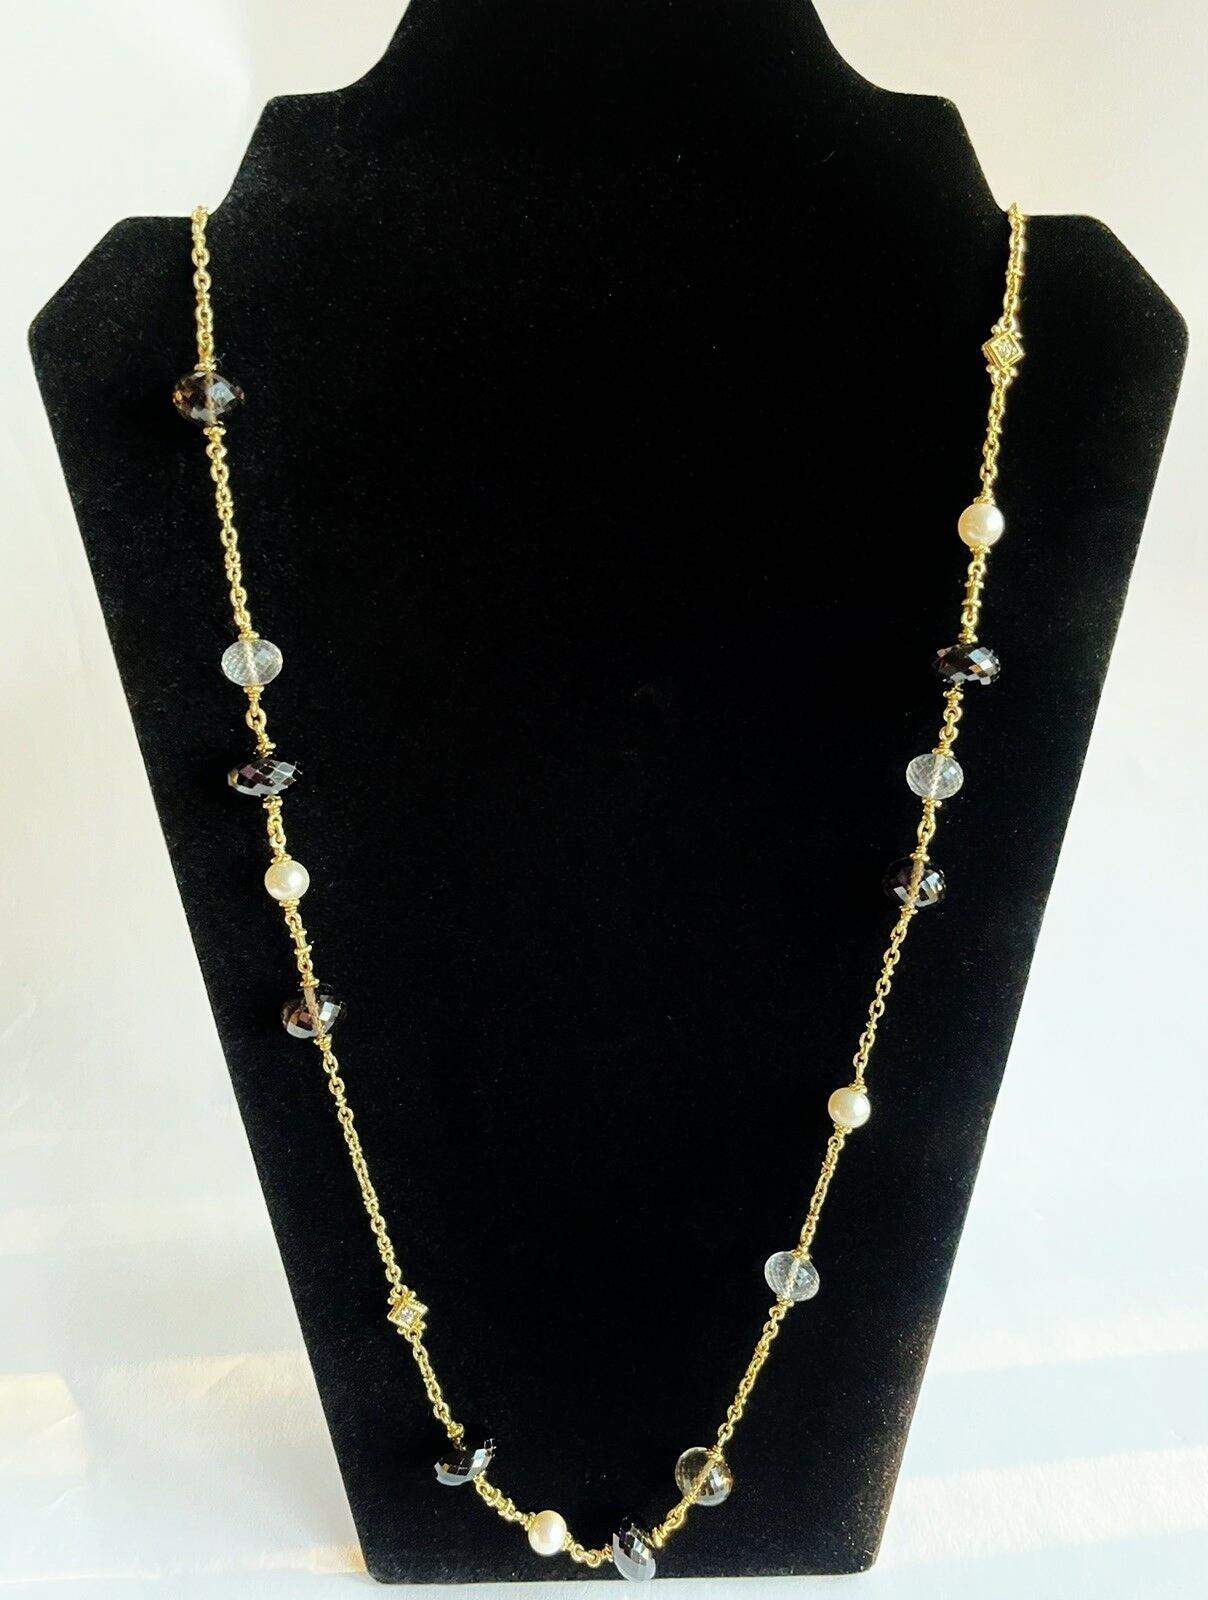 Judith Ripka Bahama Mama Diamond Gem Pearl Necklace / 80 Grams / 18K Gold In New Condition For Sale In Rancho Mirage, CA